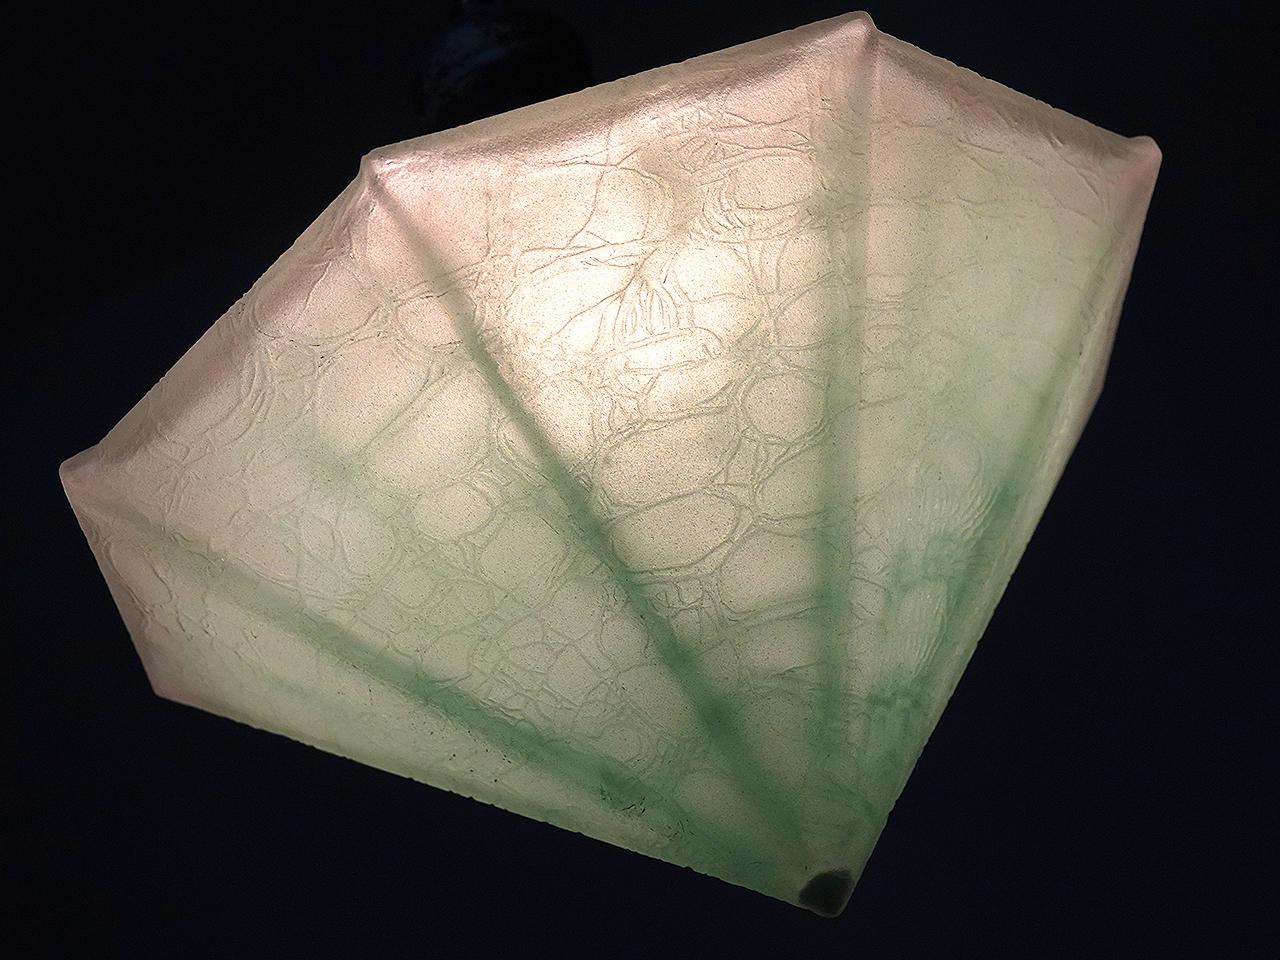 These unique lamps are offered as a matching pair. The pointed octagon shape is make these a real stand out. The heavy glass has a winkle texture and a frosted finish. In addition the shade holder has a green verdigris patina that complements the